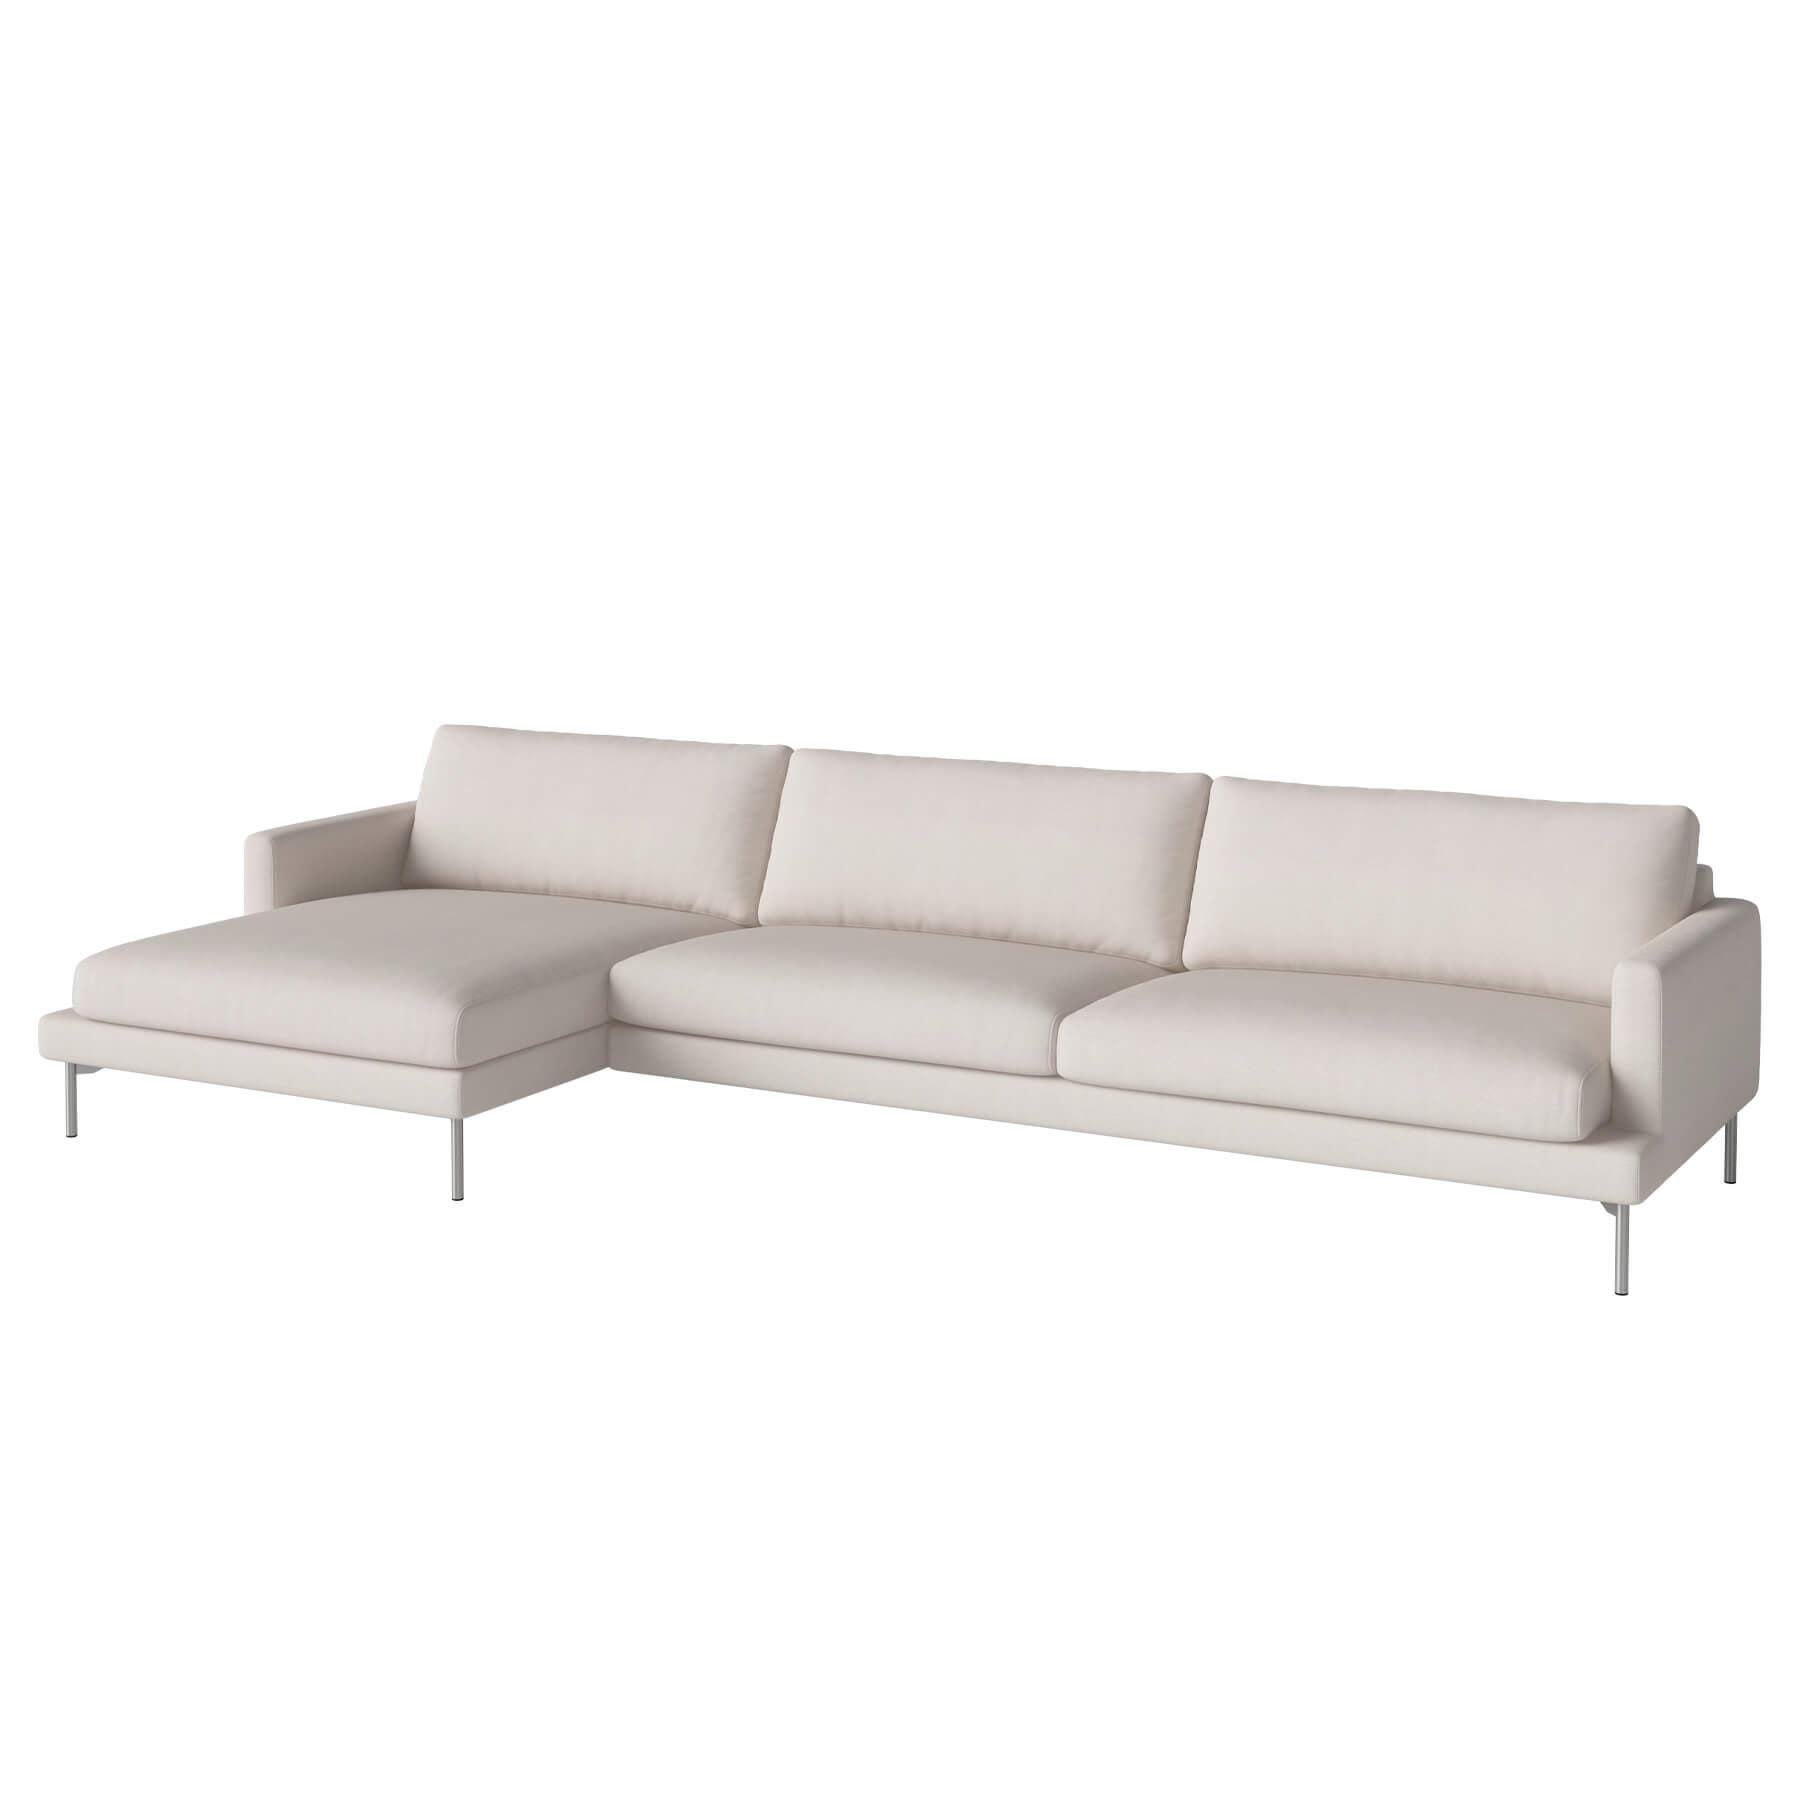 Bolia Veneda Sofa 45 Seater Sofa With Chaise Longue Brushed Steel Linea Beige Left Brown Designer Furniture From Holloways Of Ludlow